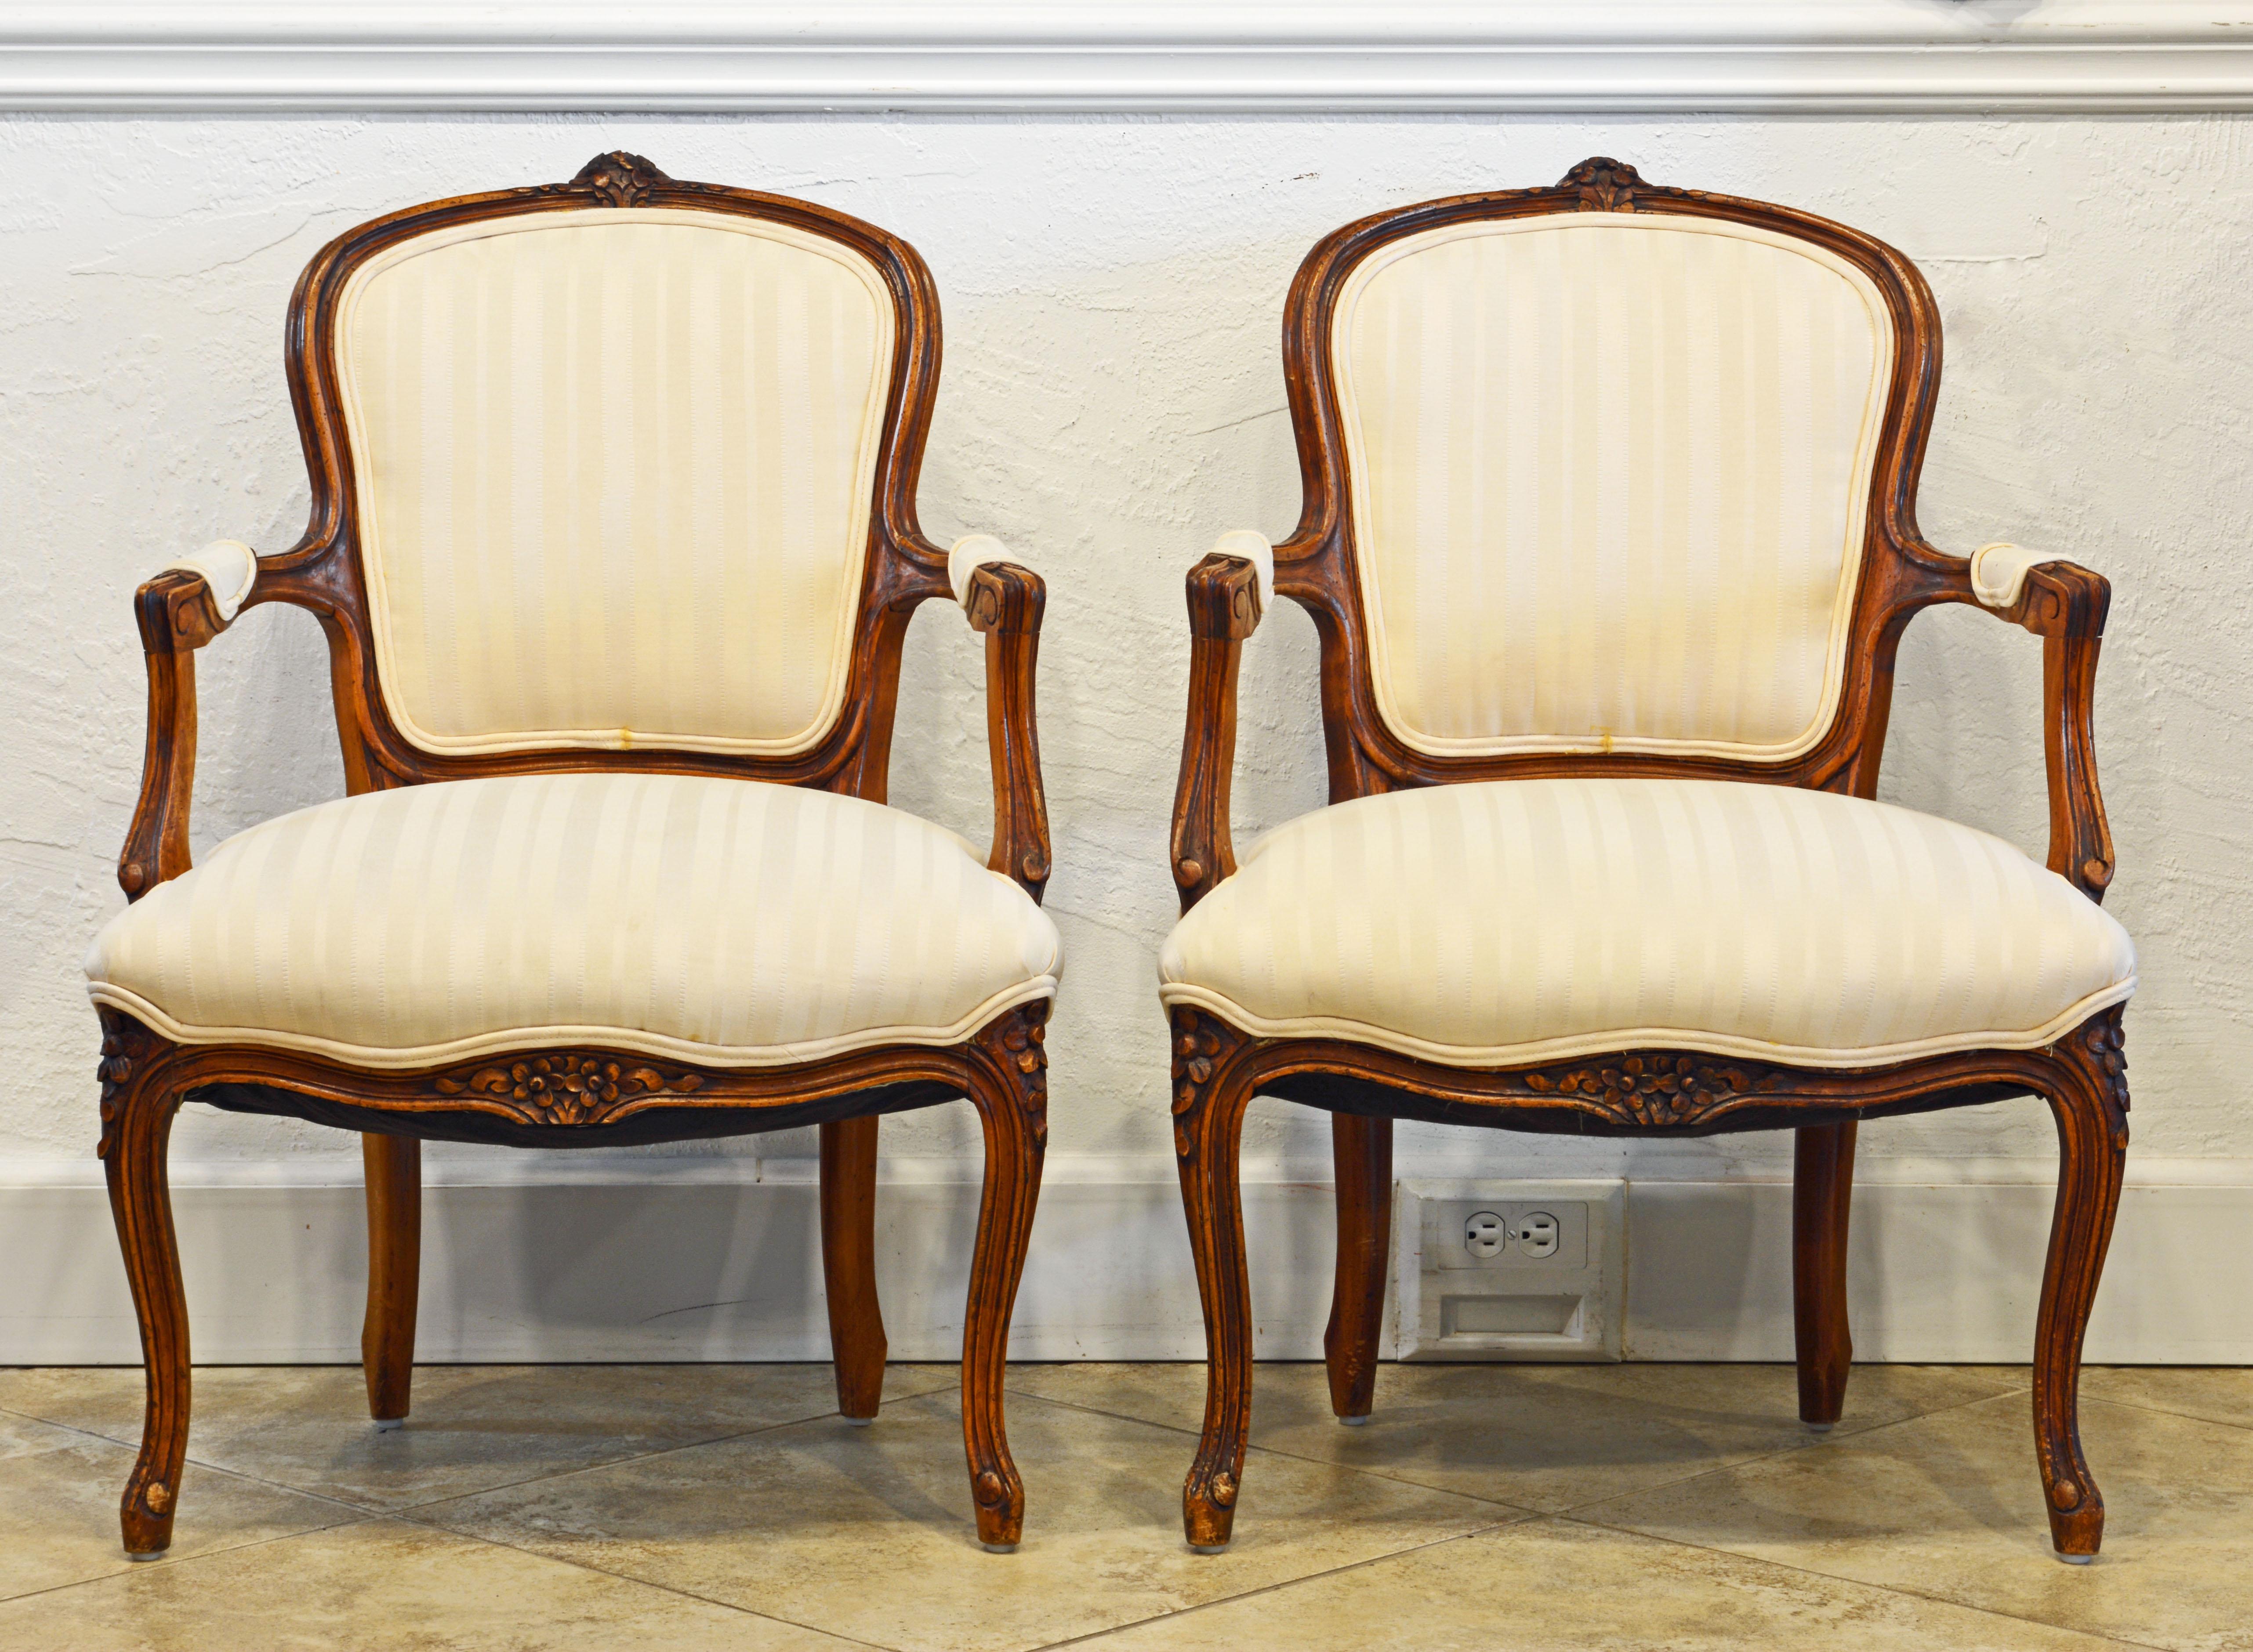 This pair of French Louis XV style carved armchairs are especially charming due to their relatively small size. They feature well carved walnut frames supporting upholstered backs, seats and armrests.